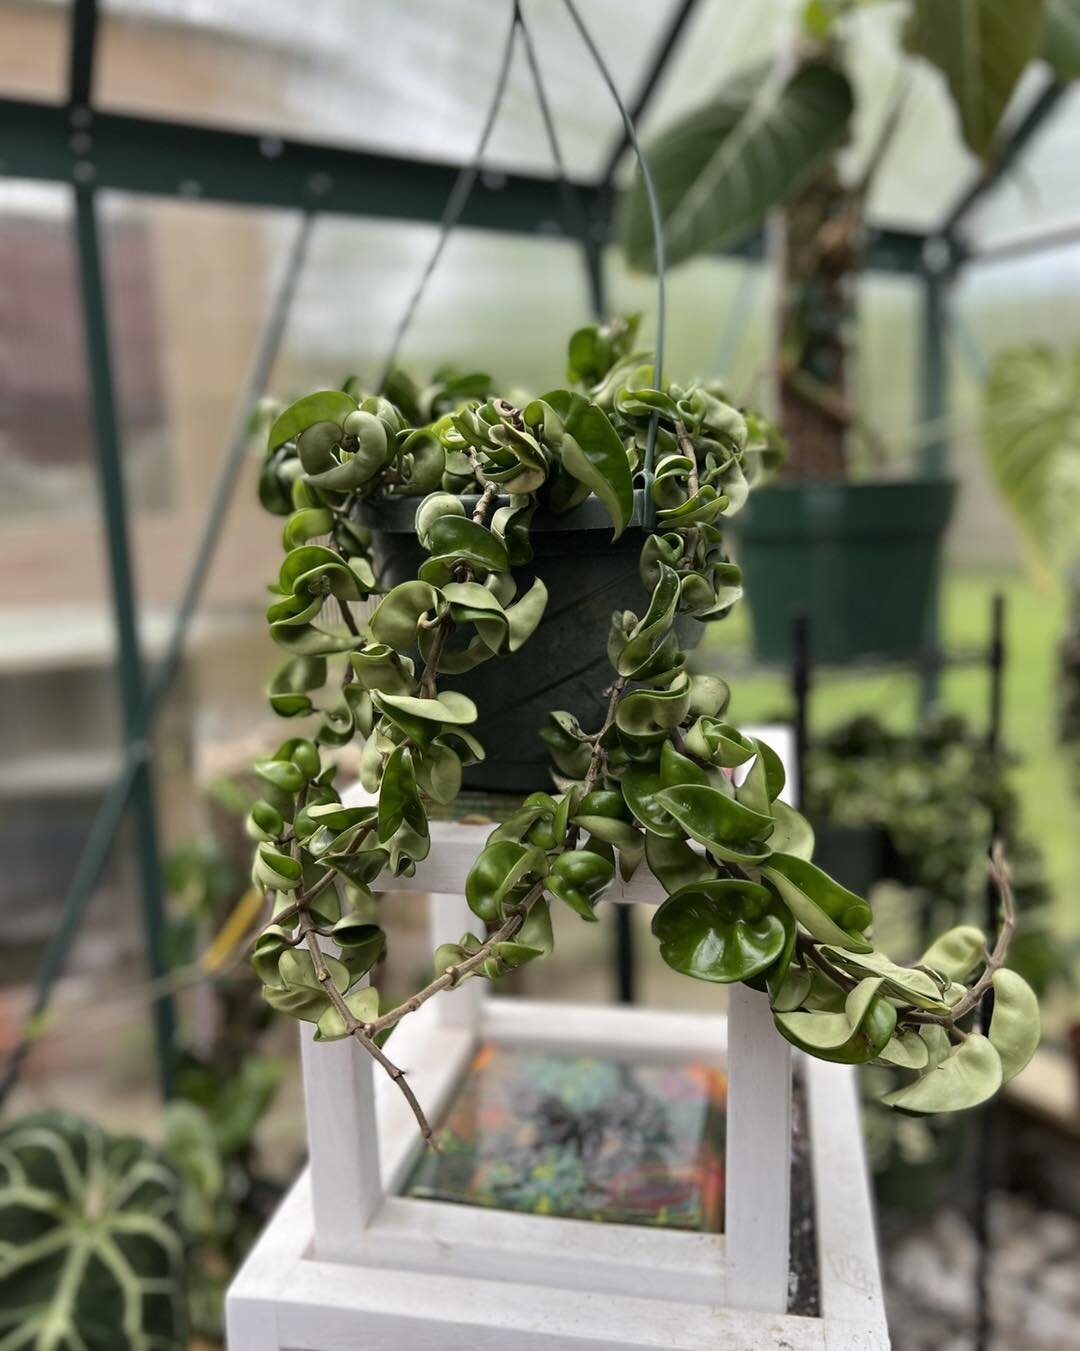 Plant of the day Hoya Carnosa Compacta 💕

Did you know A New Leaf does local deliveries Sundays 10-4 and Shipping throughout the week to help fulfill all your planty needs ✨
&bull;
&bull;
&bull;
&bull;
#hoyalover #hoyaplant #hoya #plantshop #plantso